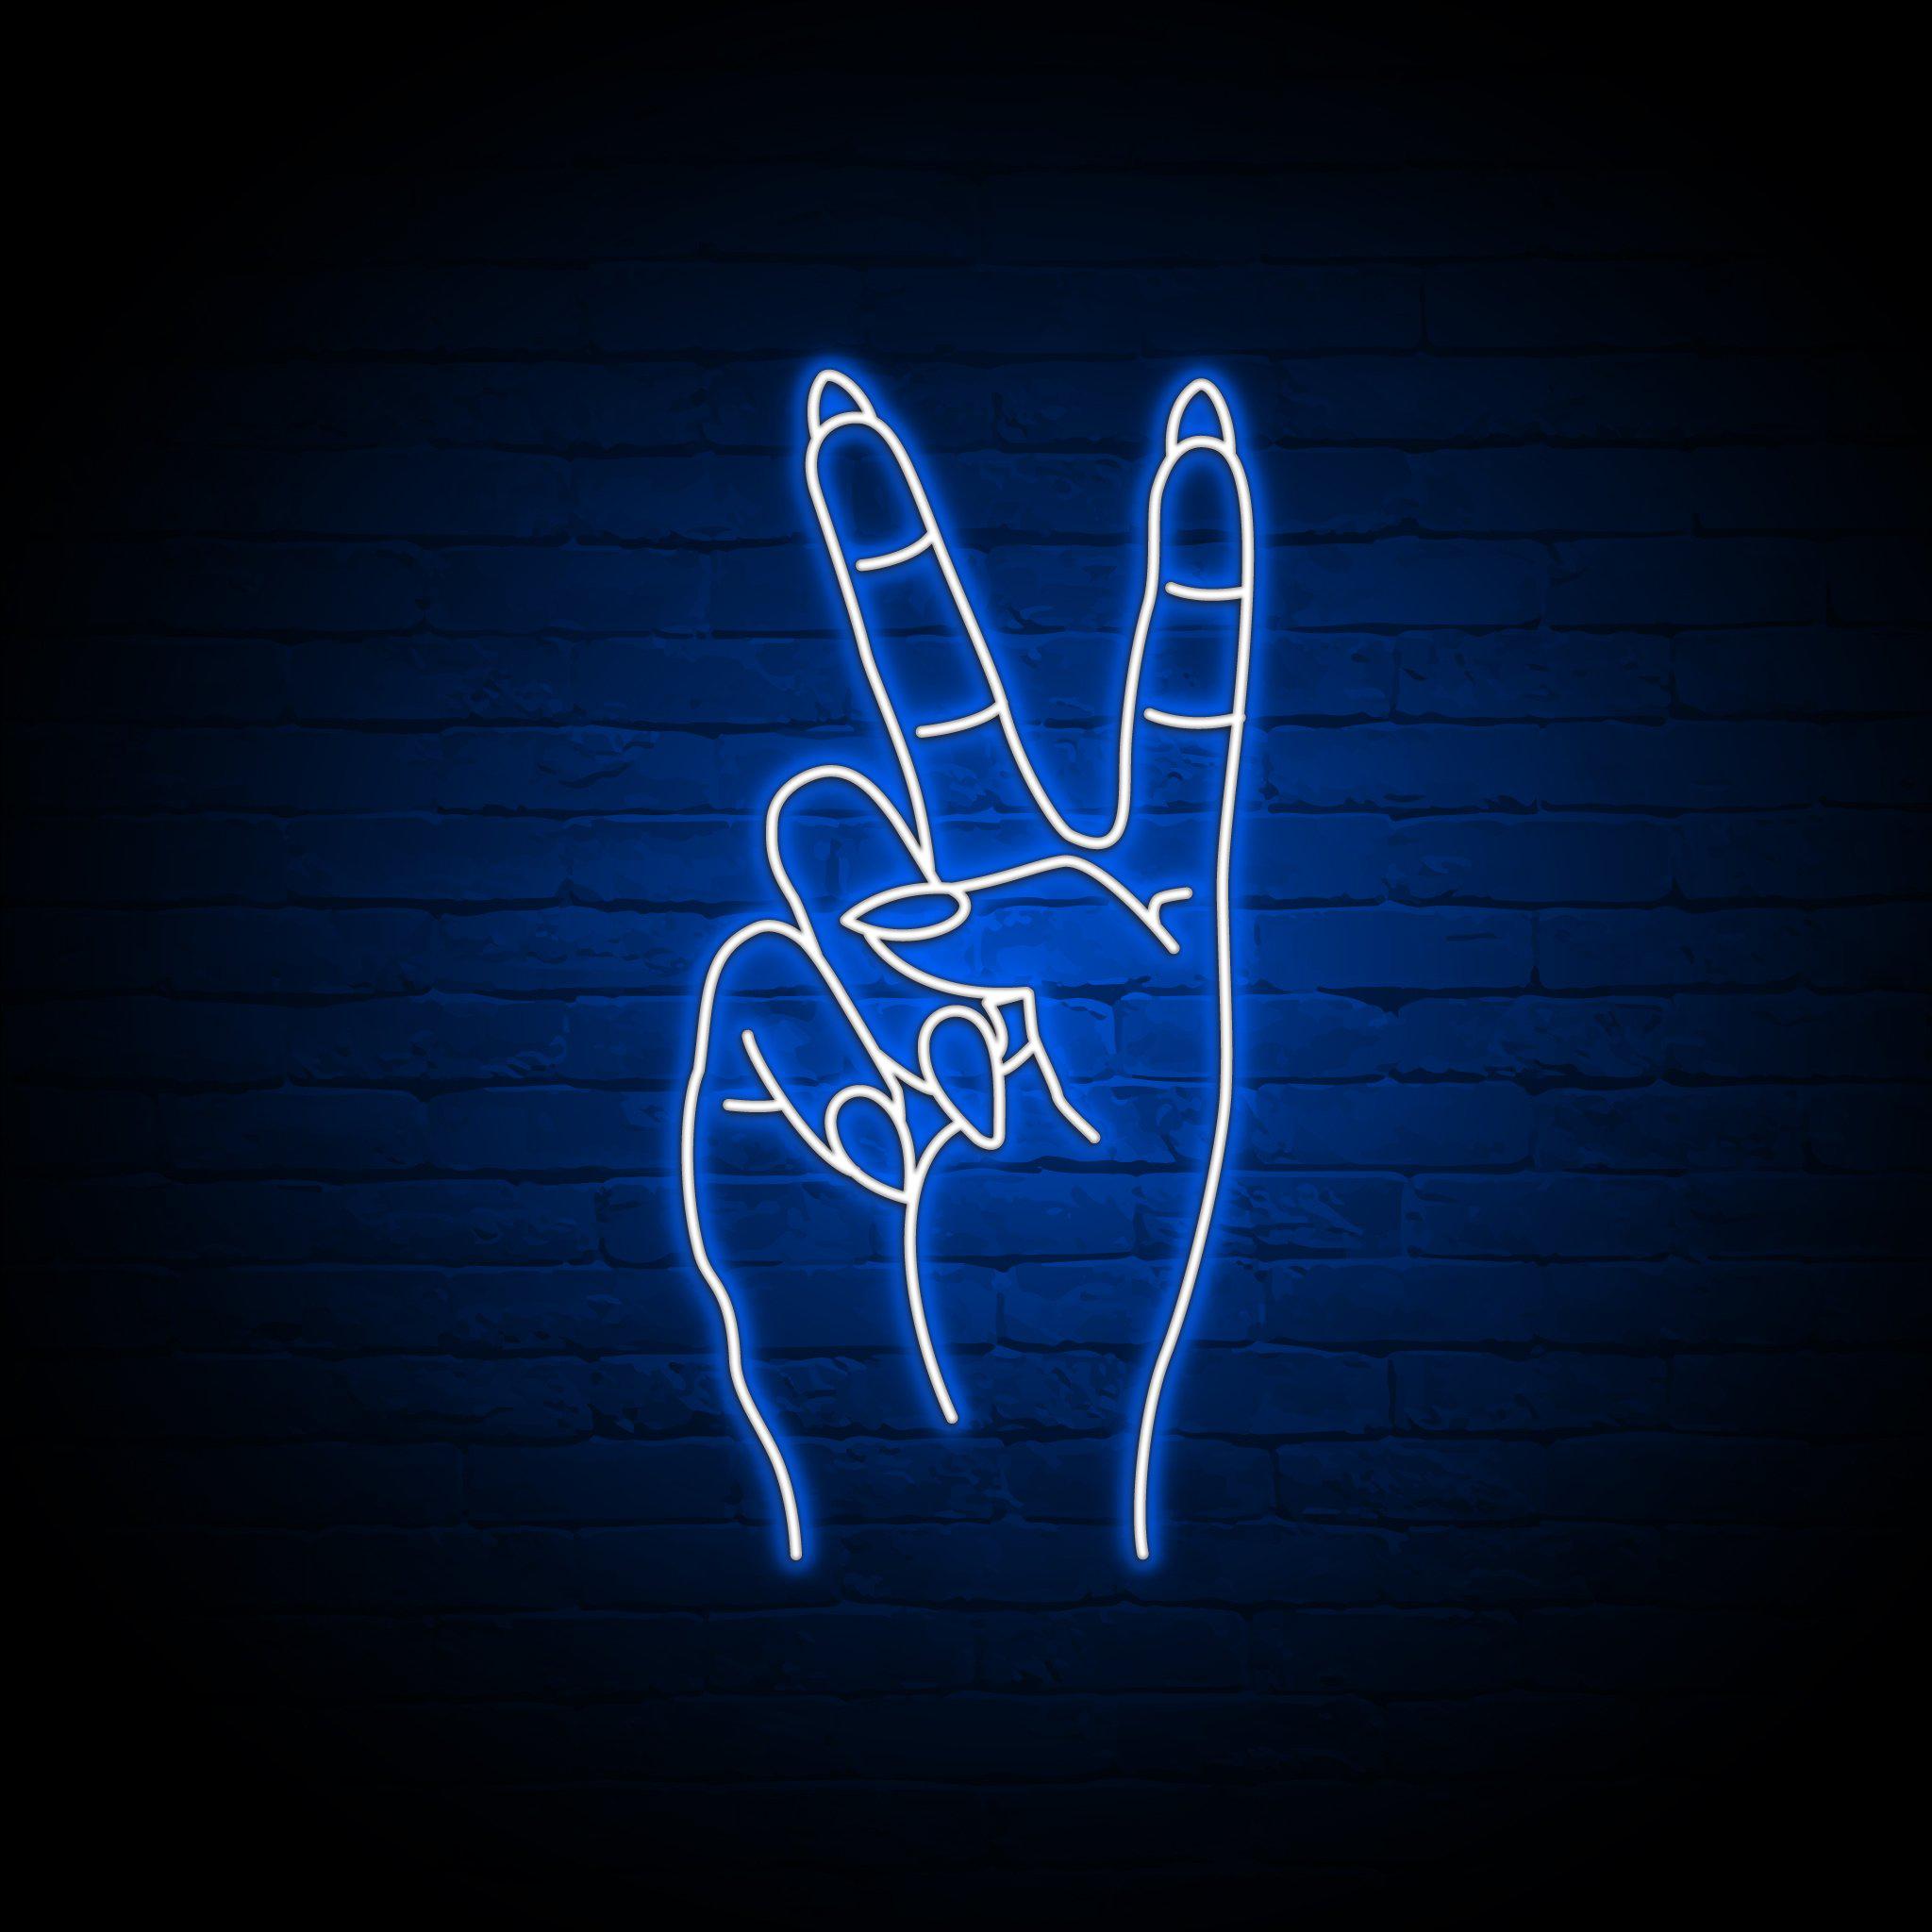 A neon sign of the peace symbol - Neon blue